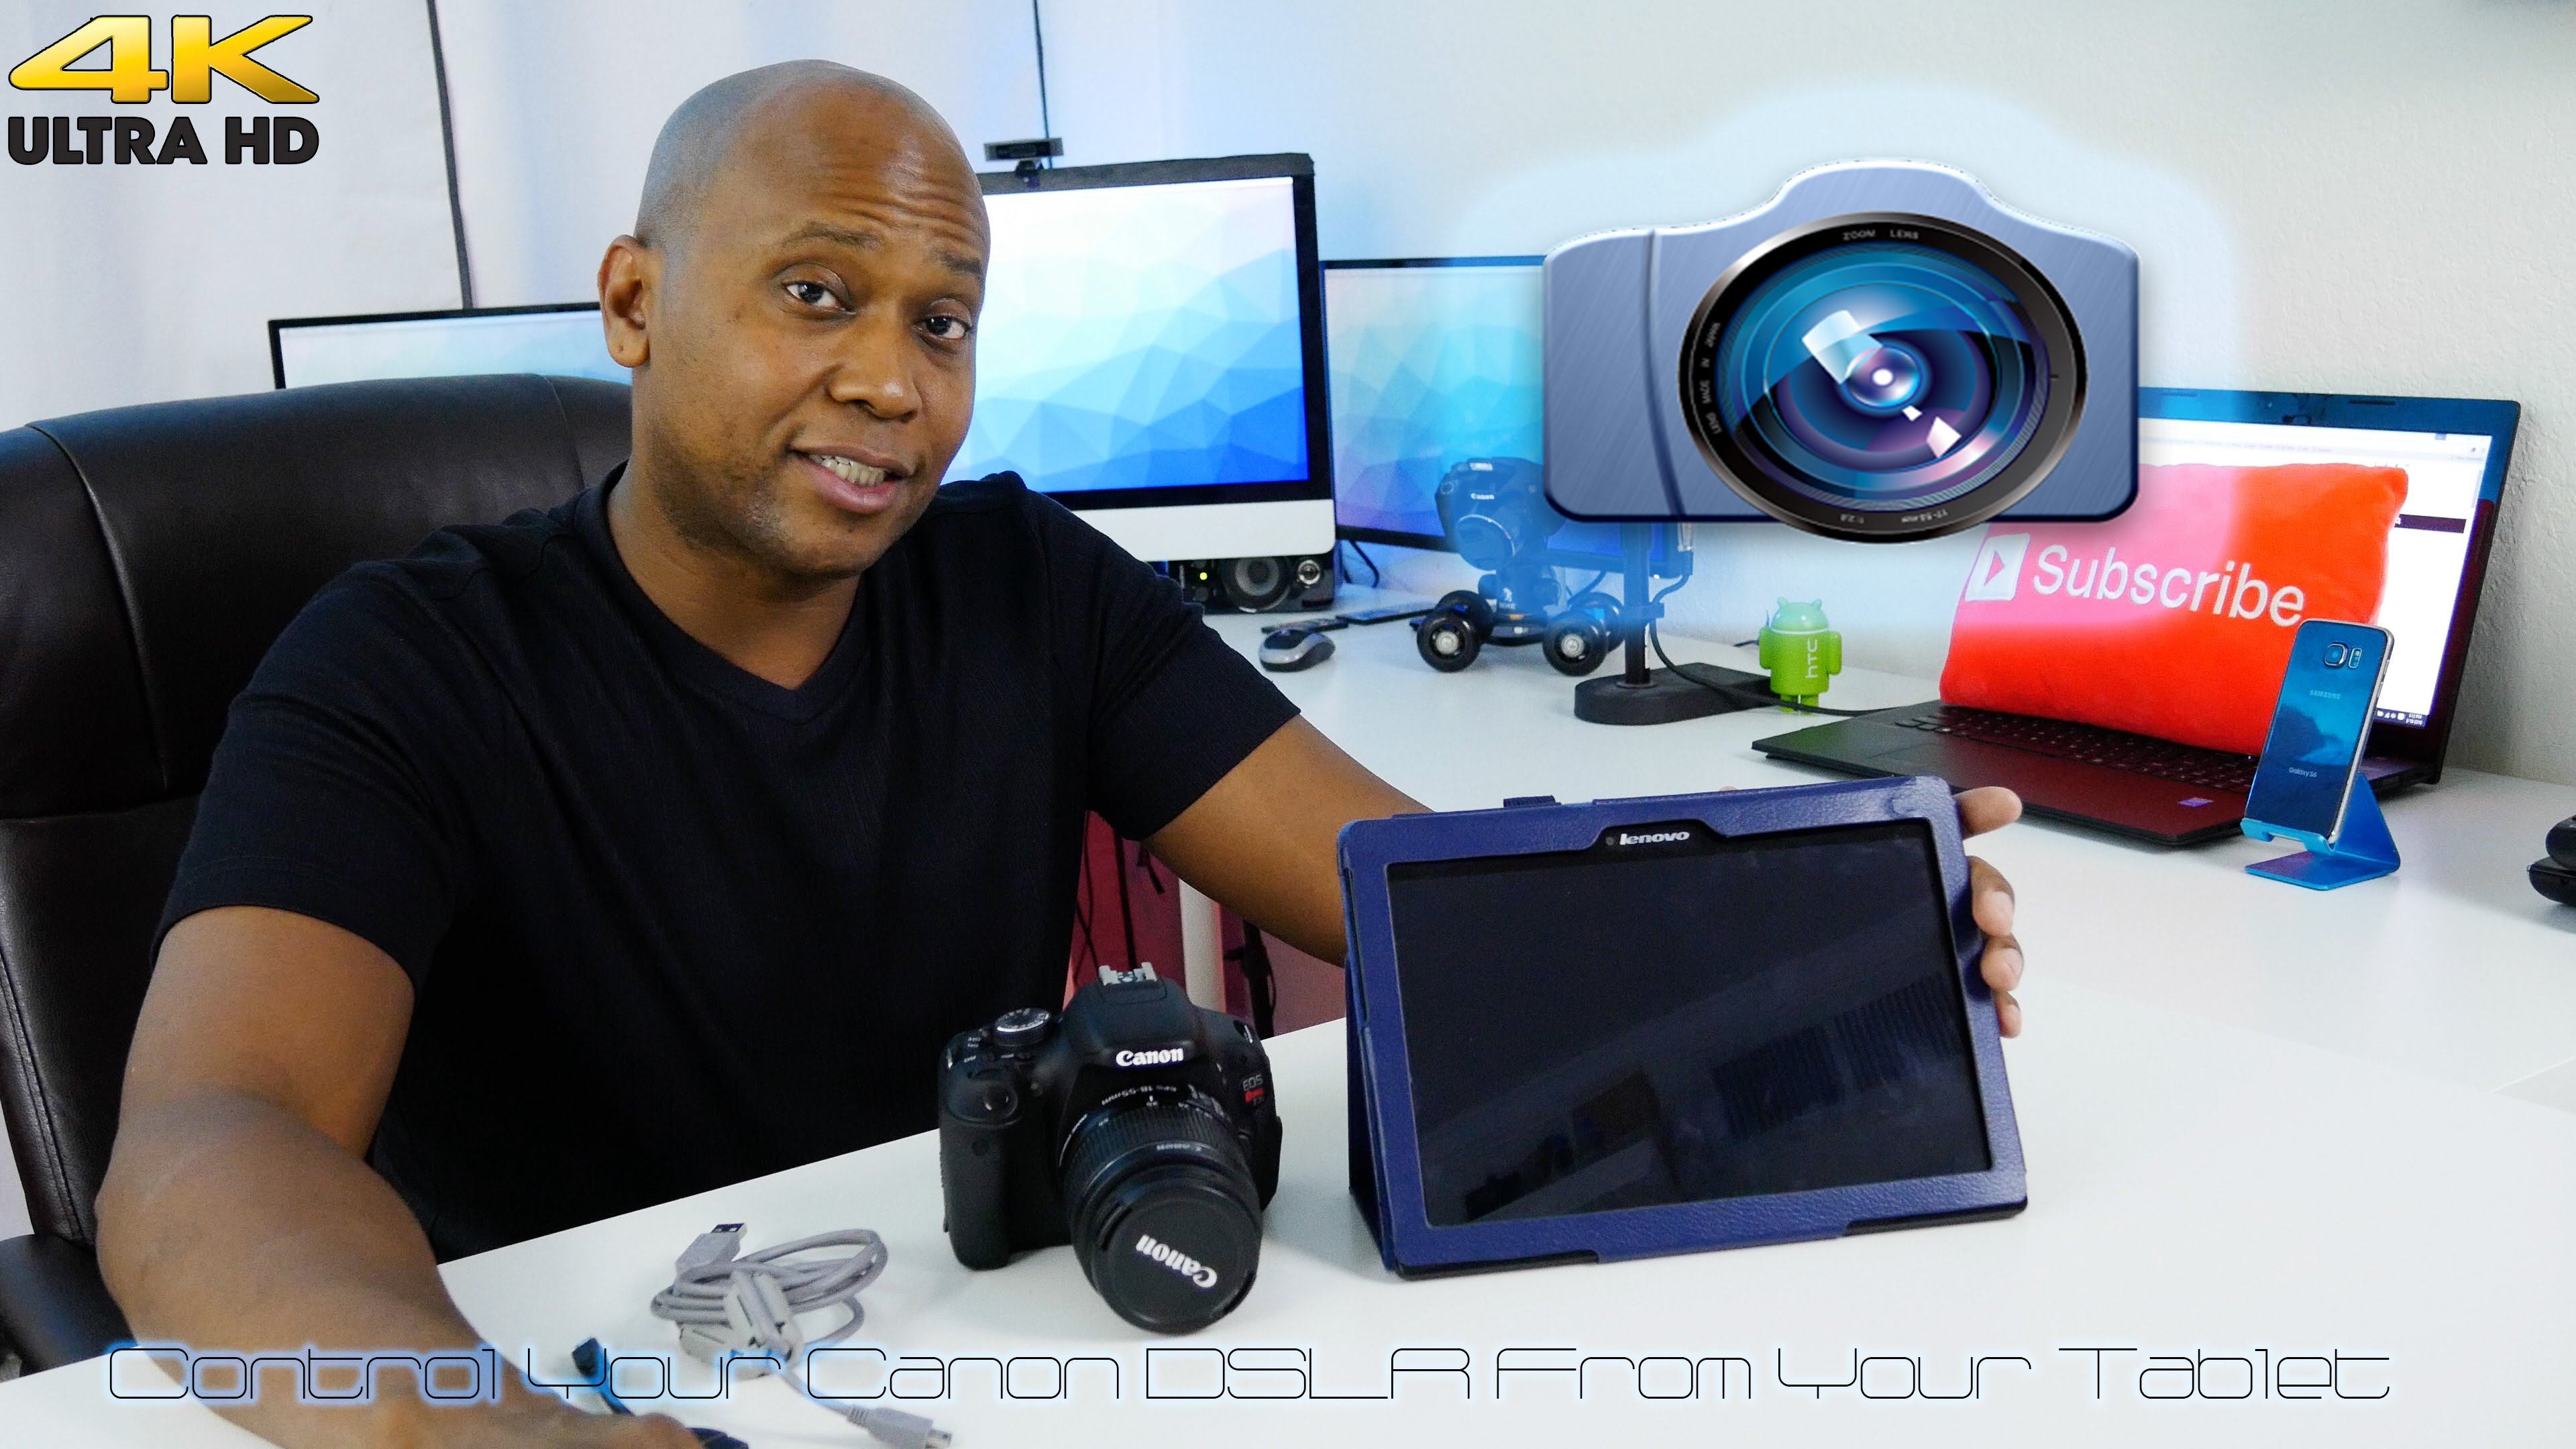 How to Control Your Canon Camera with a app on a tablet for $20 Bucks